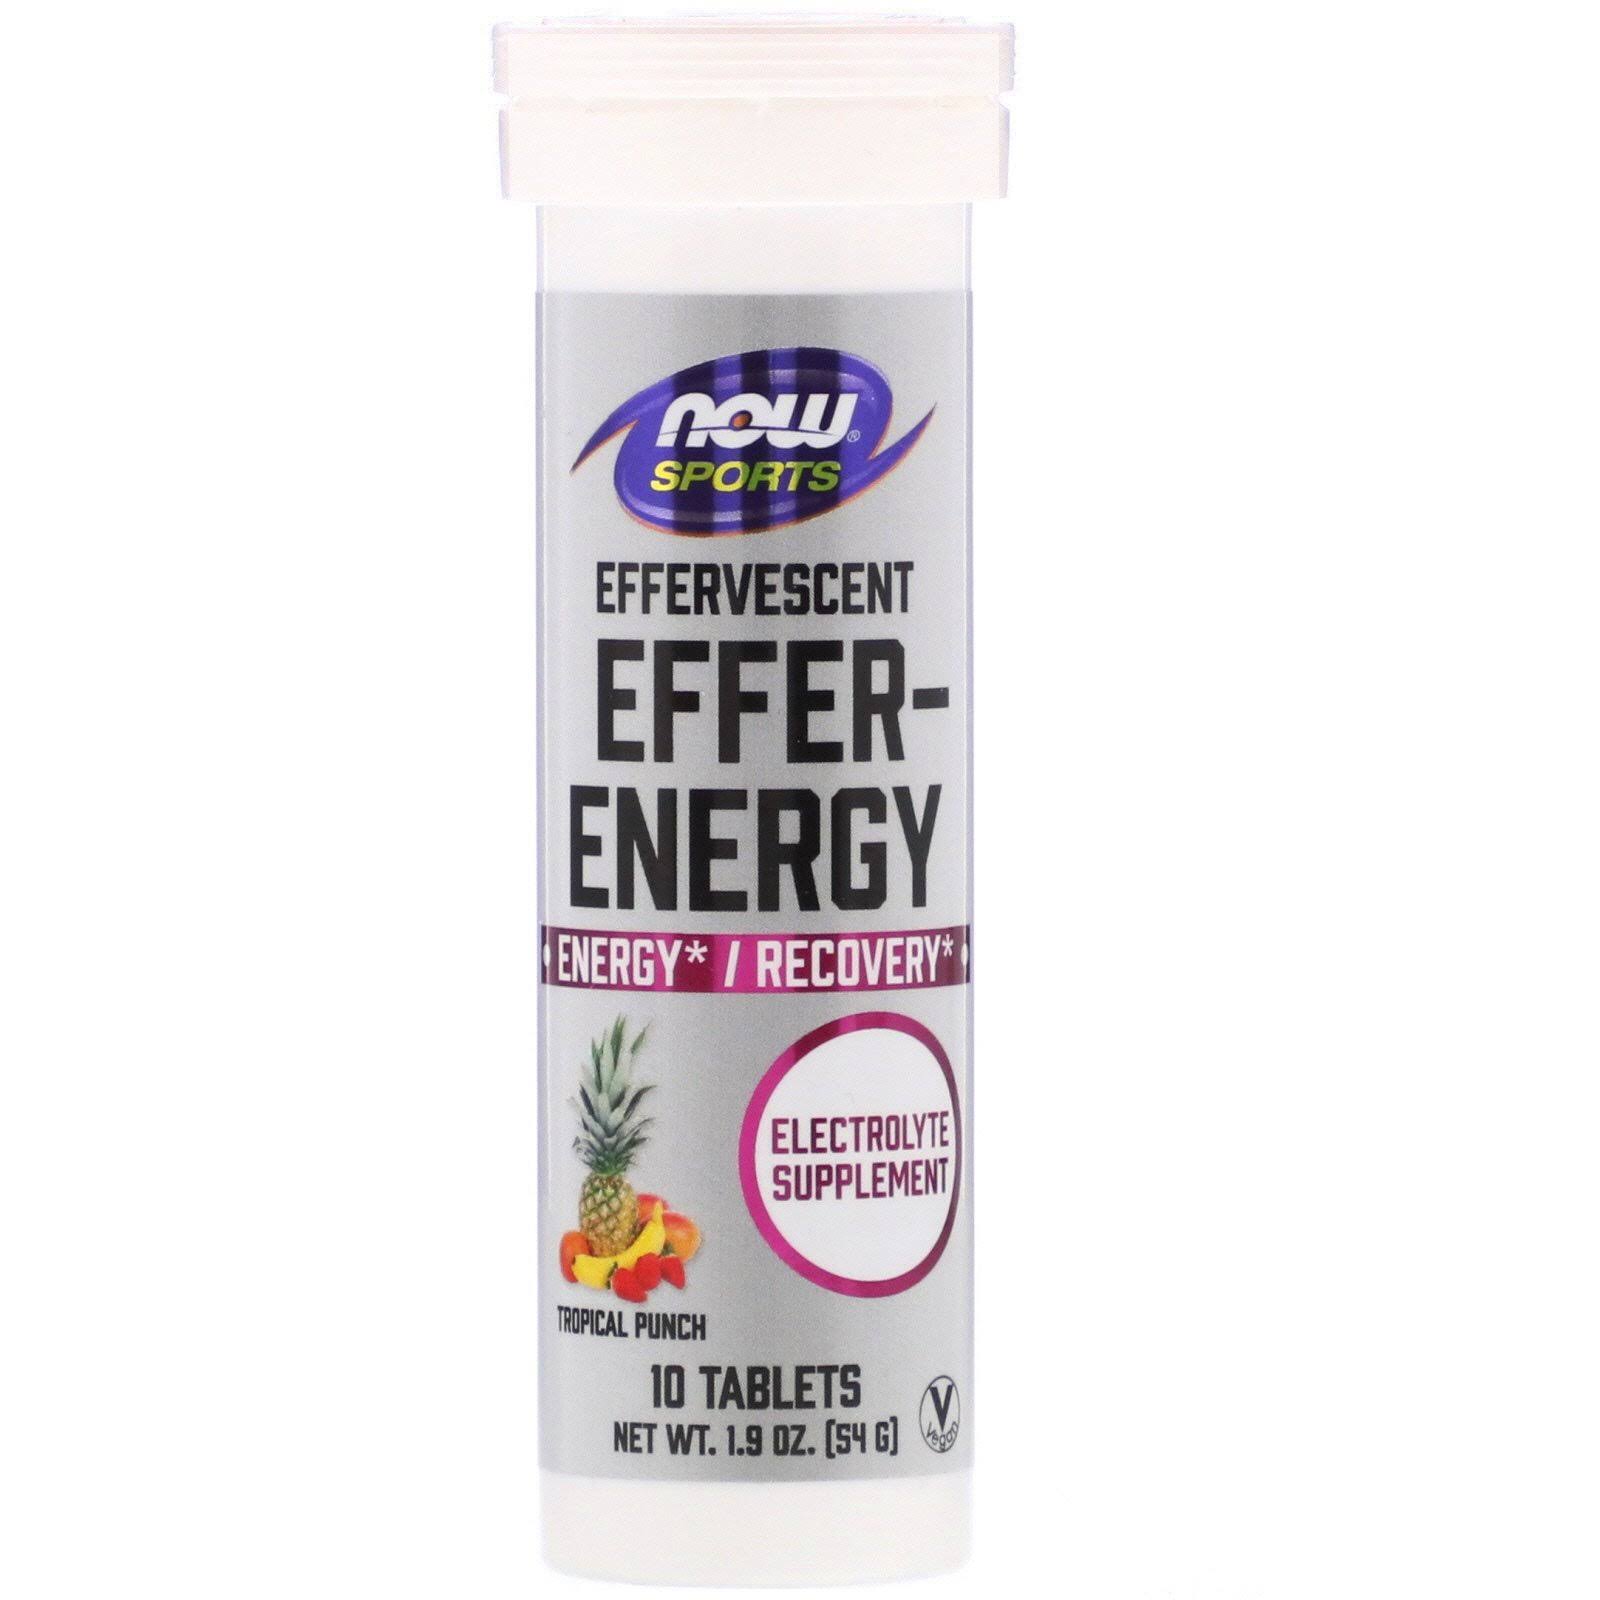 Now Foods Effer-Energy Effervescent - 10 Tablets Tropical Punch